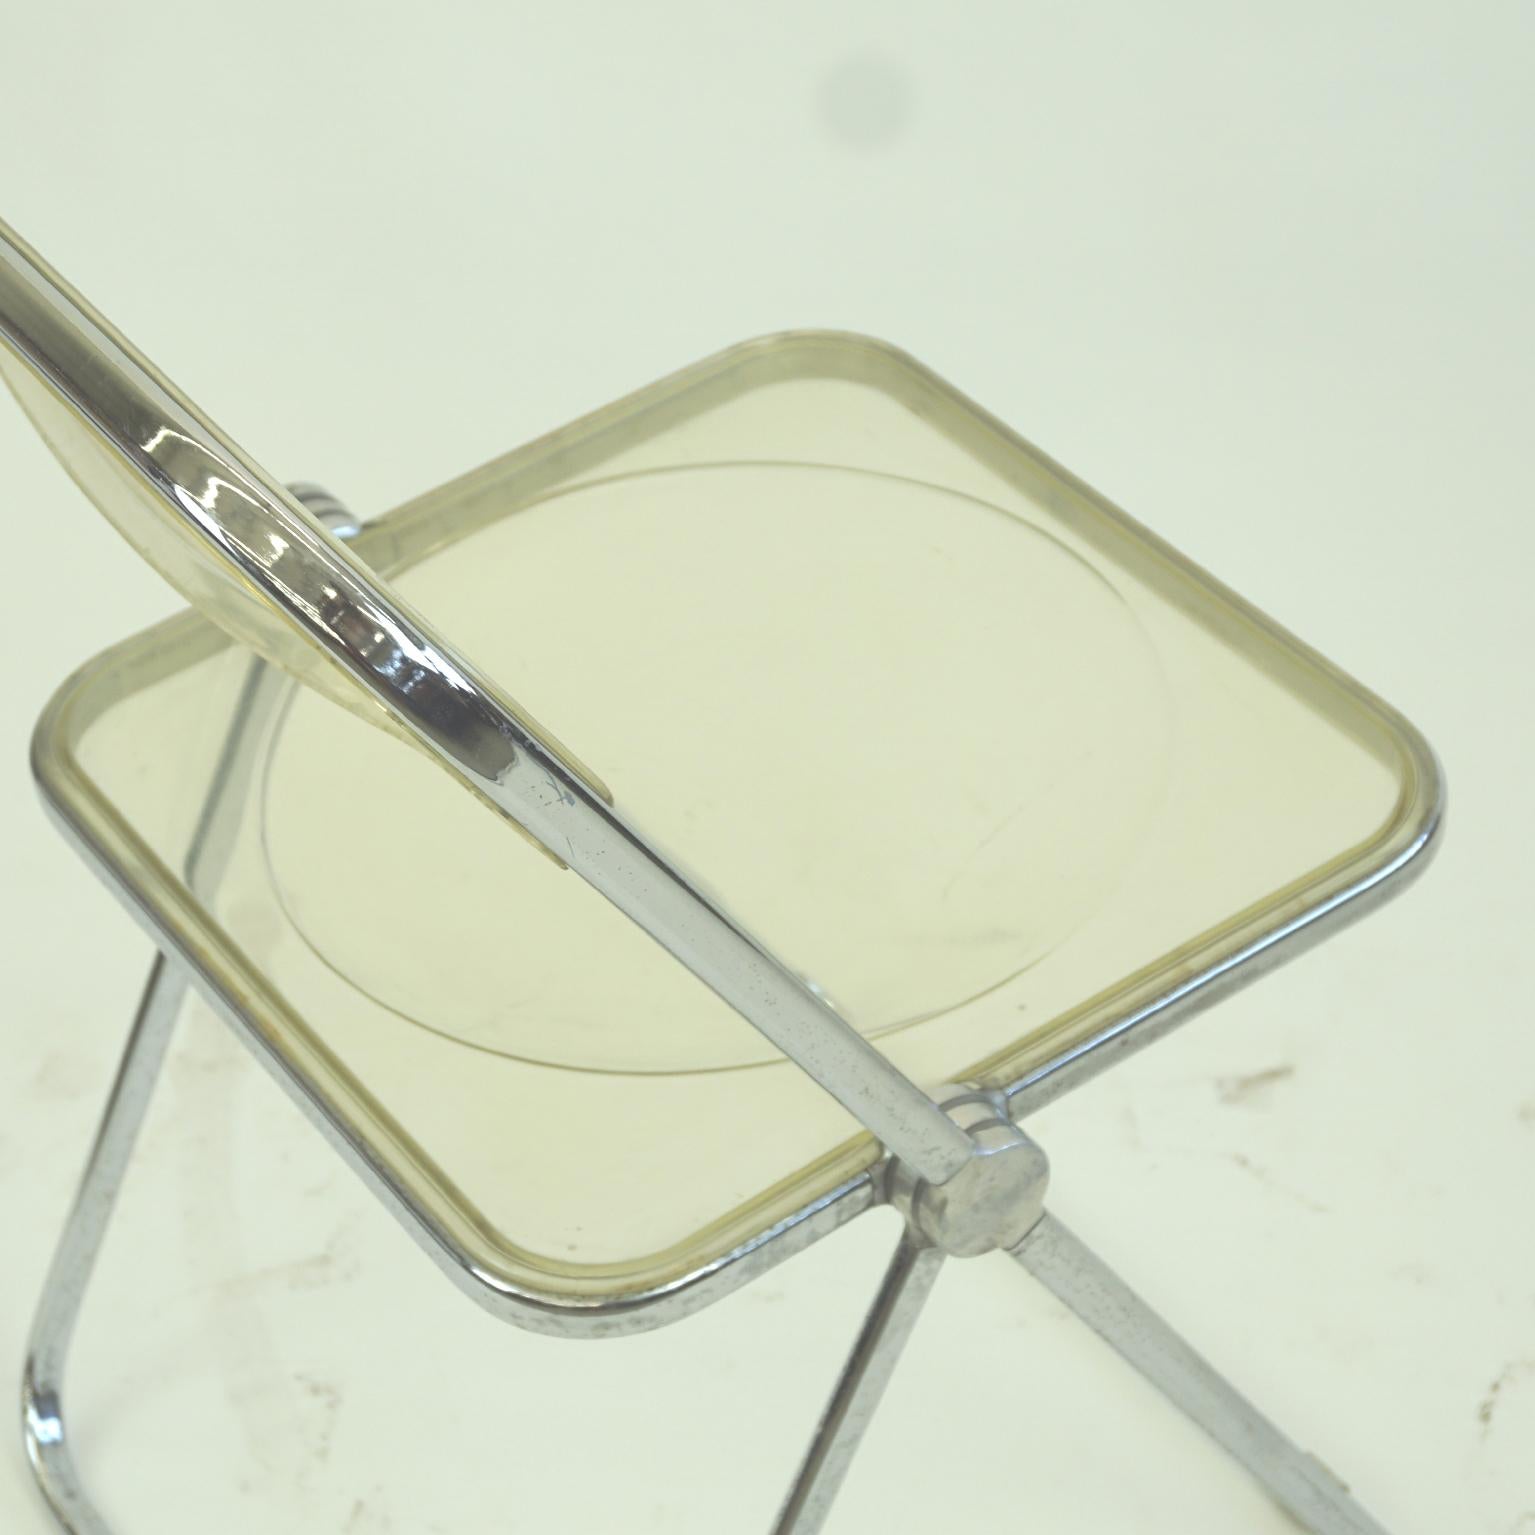 Italian 1960s Chrome and Lucite Plia Folding Chair by G. Piretti for Castelli In Good Condition For Sale In Vienna, AT